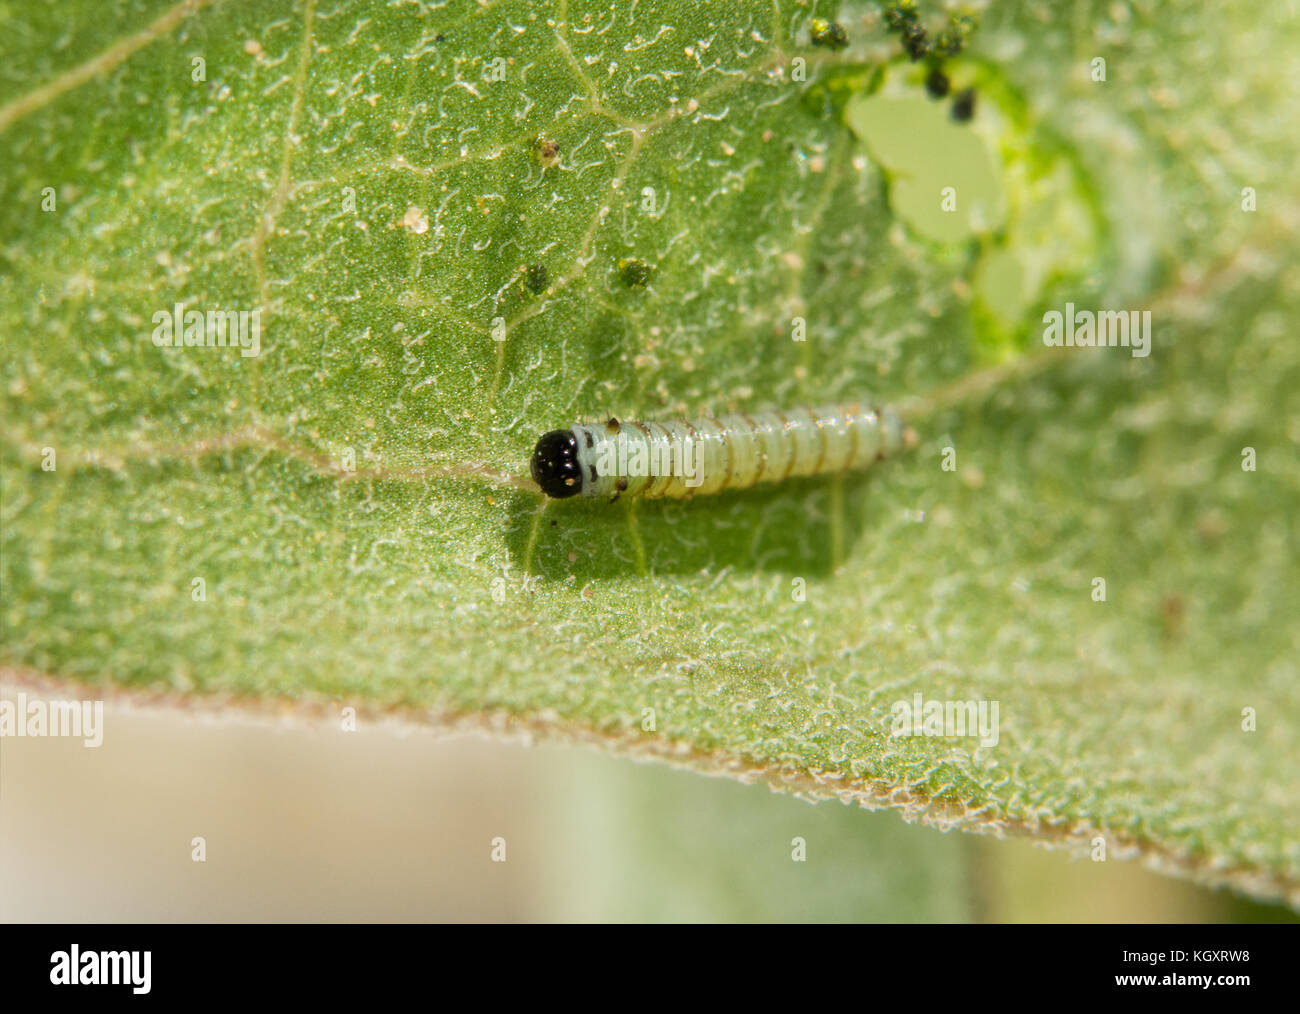 Very small first instar Monarch caterpillar soon after hatching from egg, resting on a Milkweed after eating a hole in the leaf Stock Photo